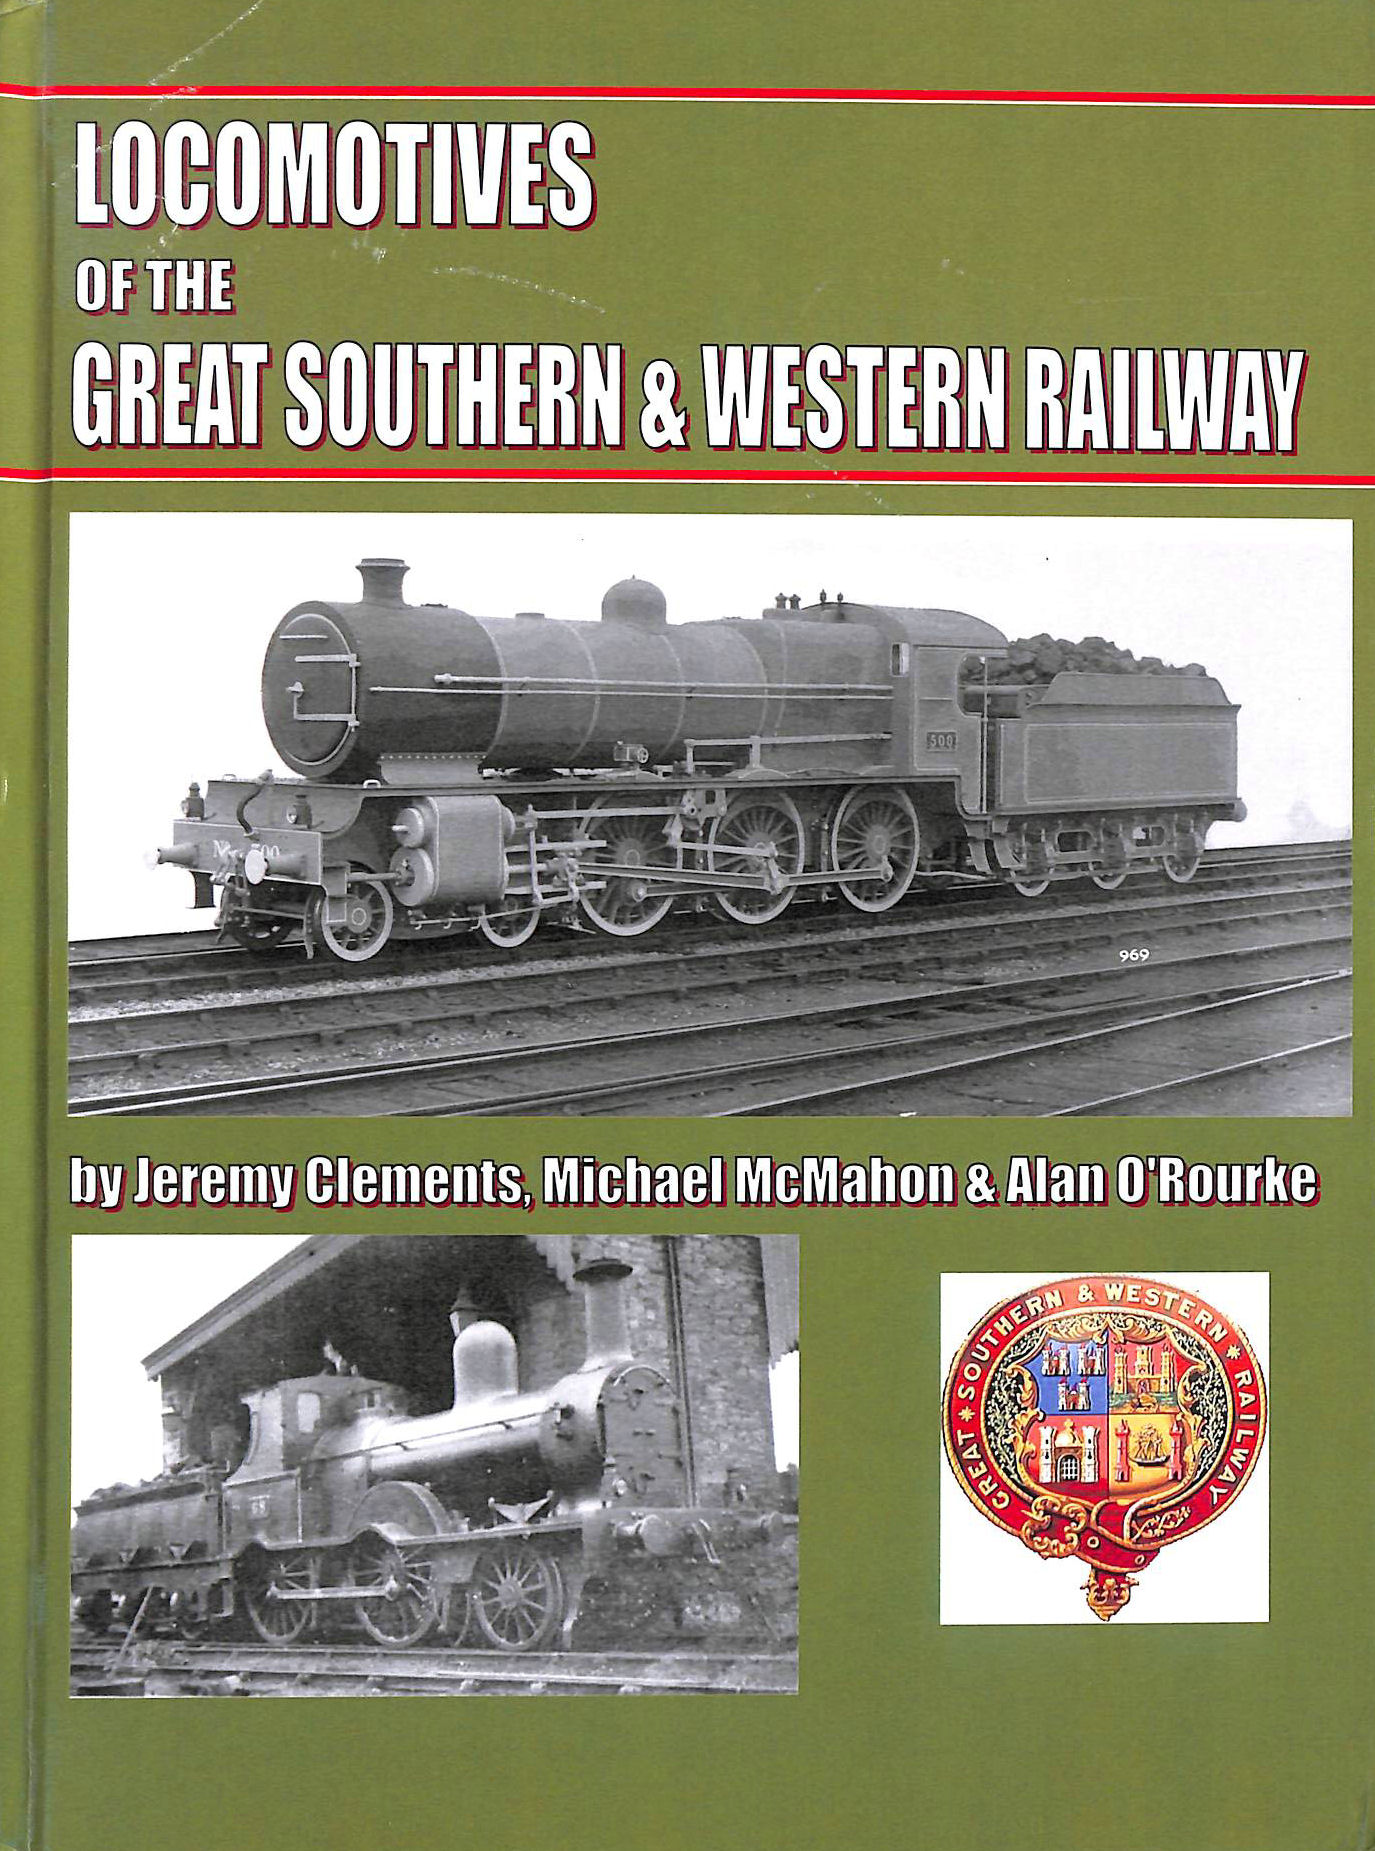 JEREMY CLEMENTS, MICHAEL MCMAHON & ALAN O'ROURKE - Locomotives Of The Great Southern & Western Railway